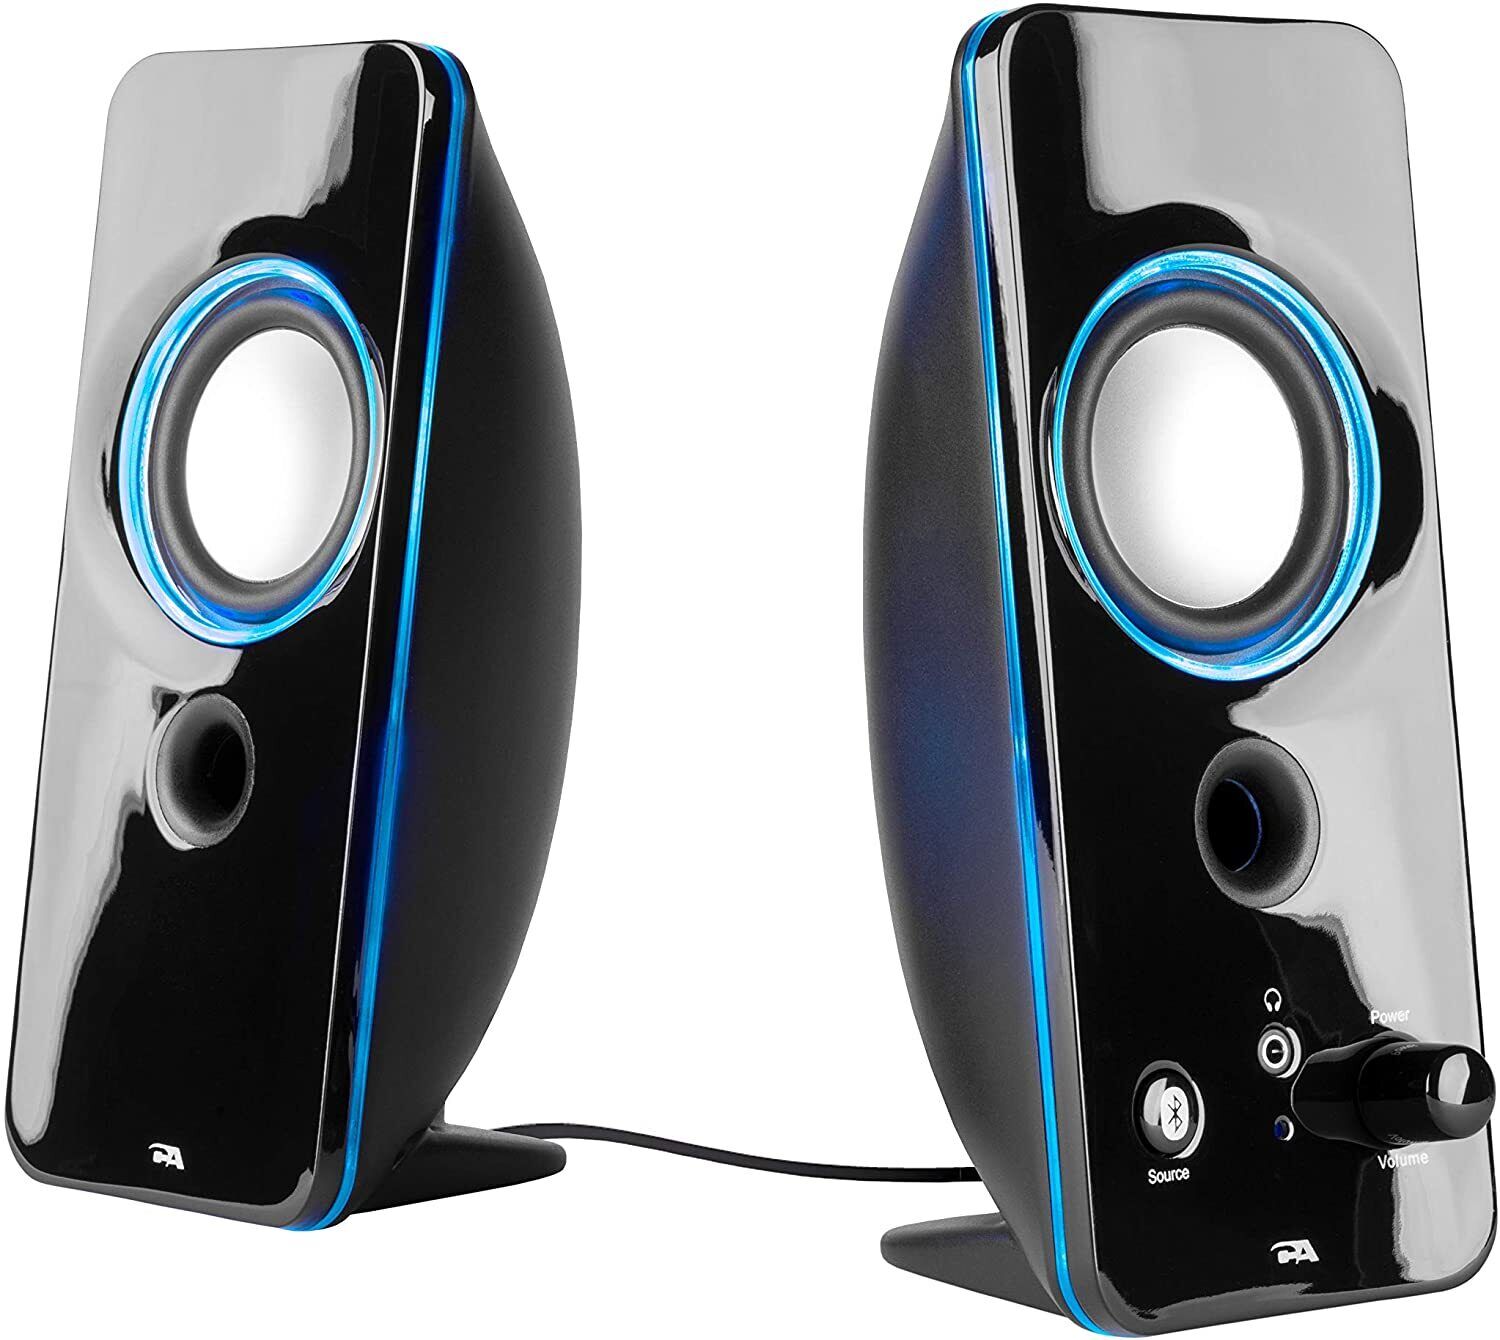 Lot 3 Insignia Color Changing 2.0 Wireless Computer Speakers Bluetooth NS-2810BT